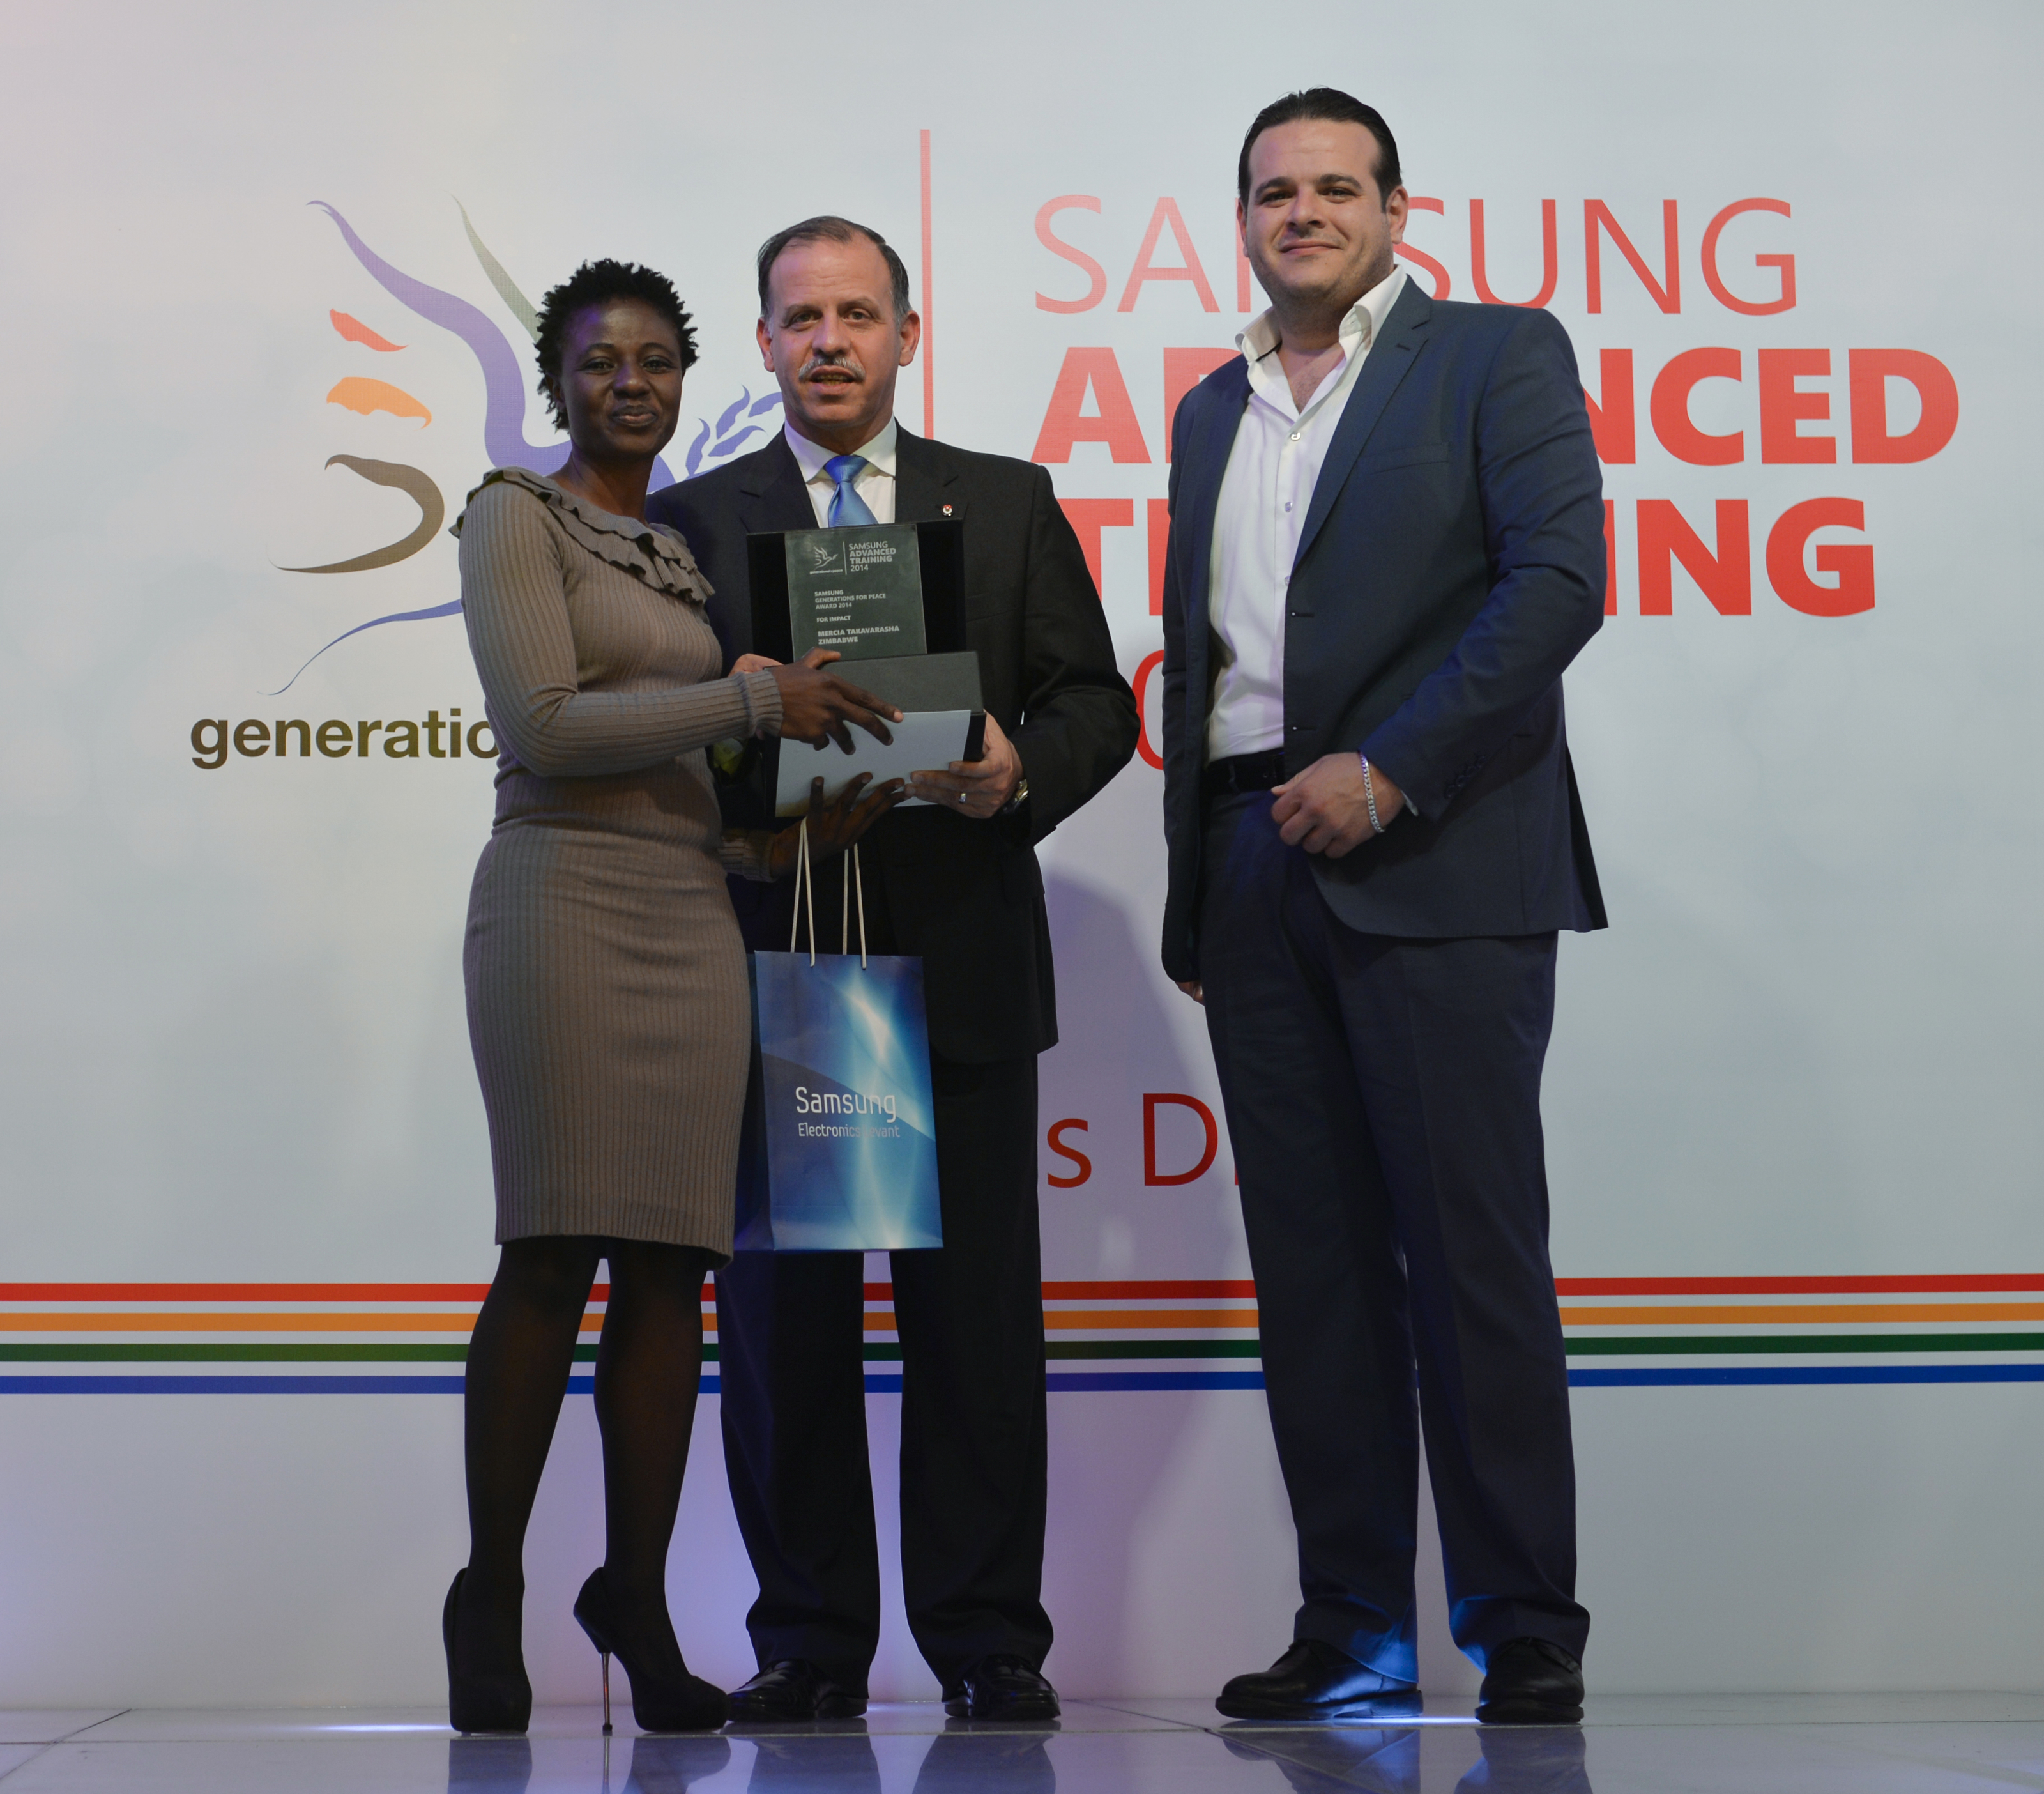 Mercia receiving her award from HRH Prince Feisal Al Hussein and Mr Fadi Awni Abu Shamat (Samsung Levant), and their fellow facilitators